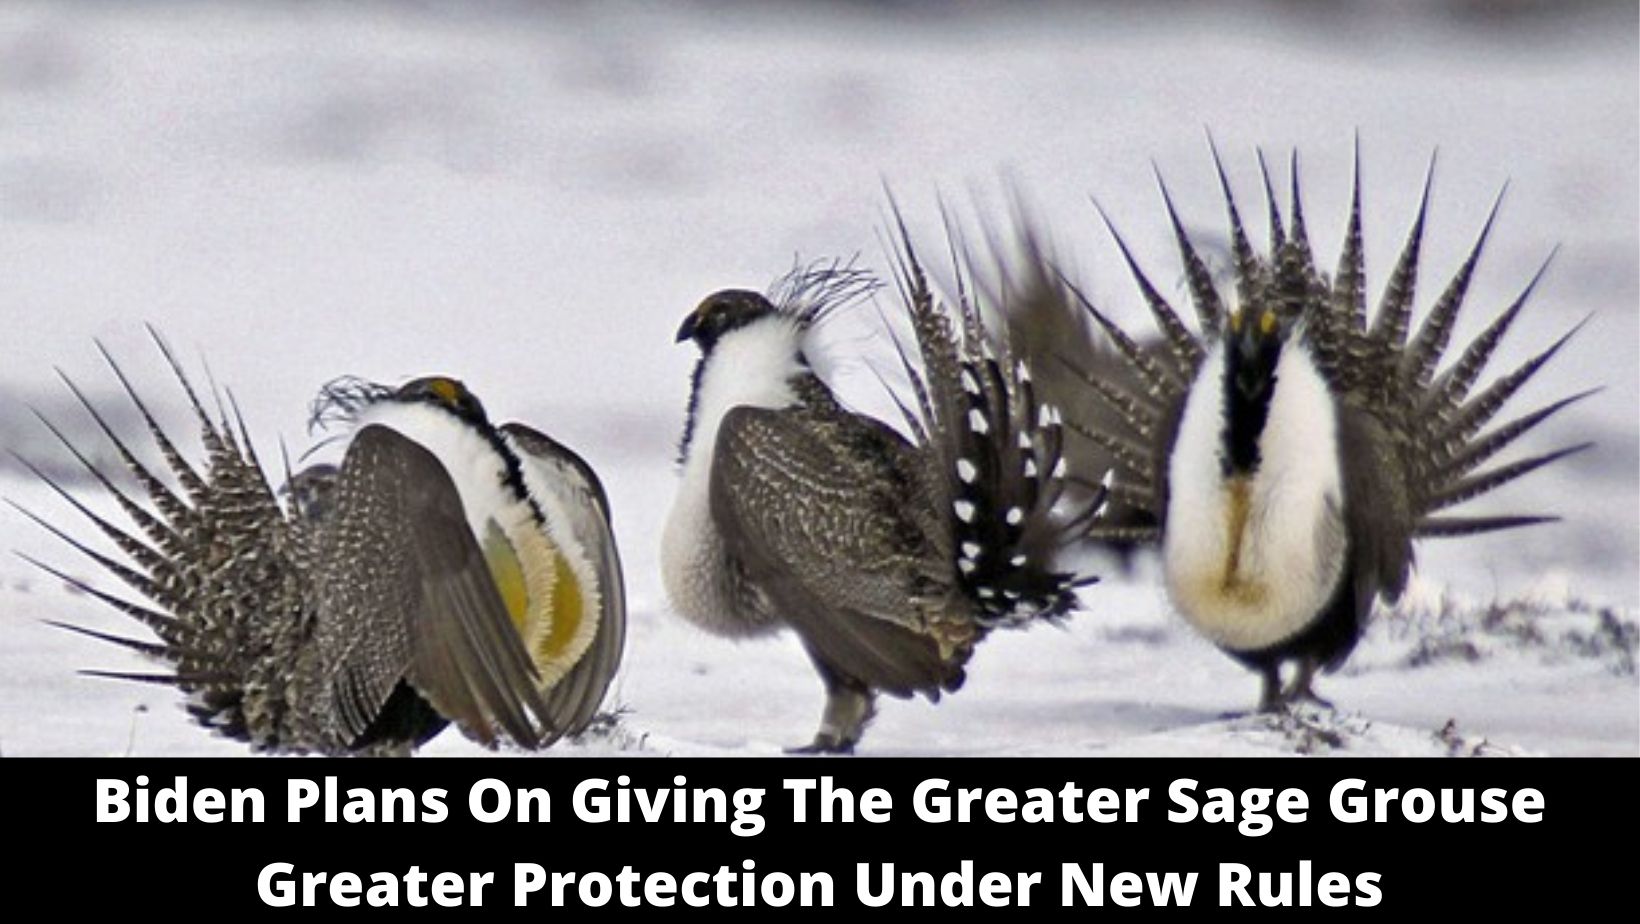 Biden Plans On Giving The Greater Sage Grouse Greater Protection Under New Rules